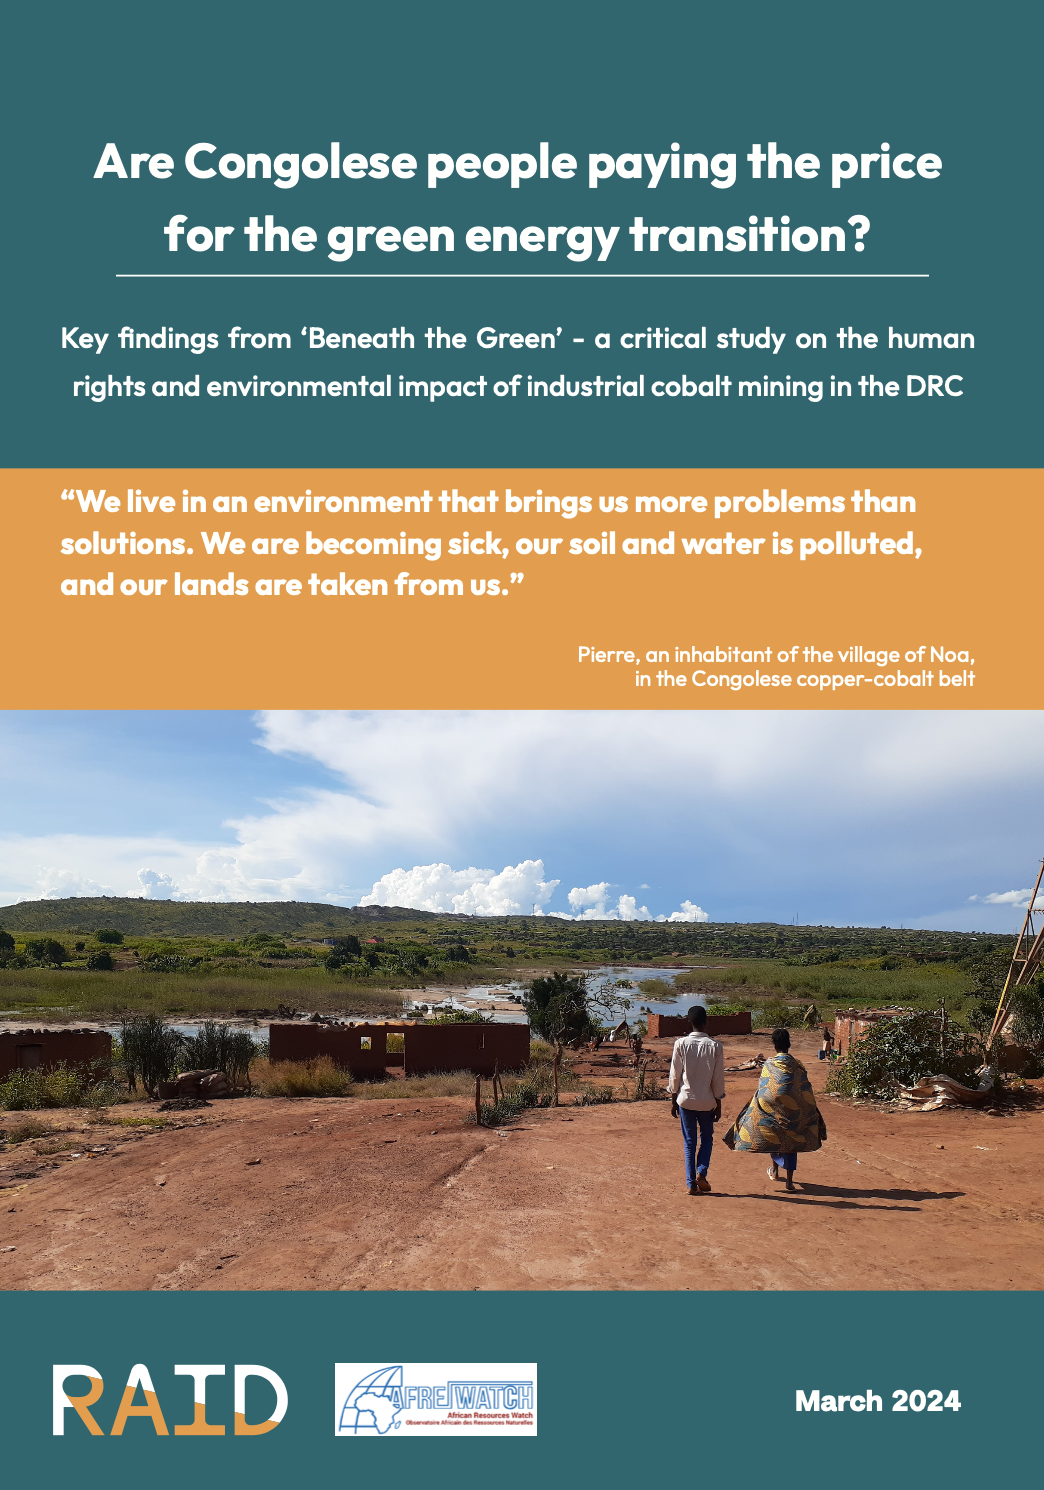 Key findings: Toxic pollution from DRC industrial cobalt mines challenges clean energy claims